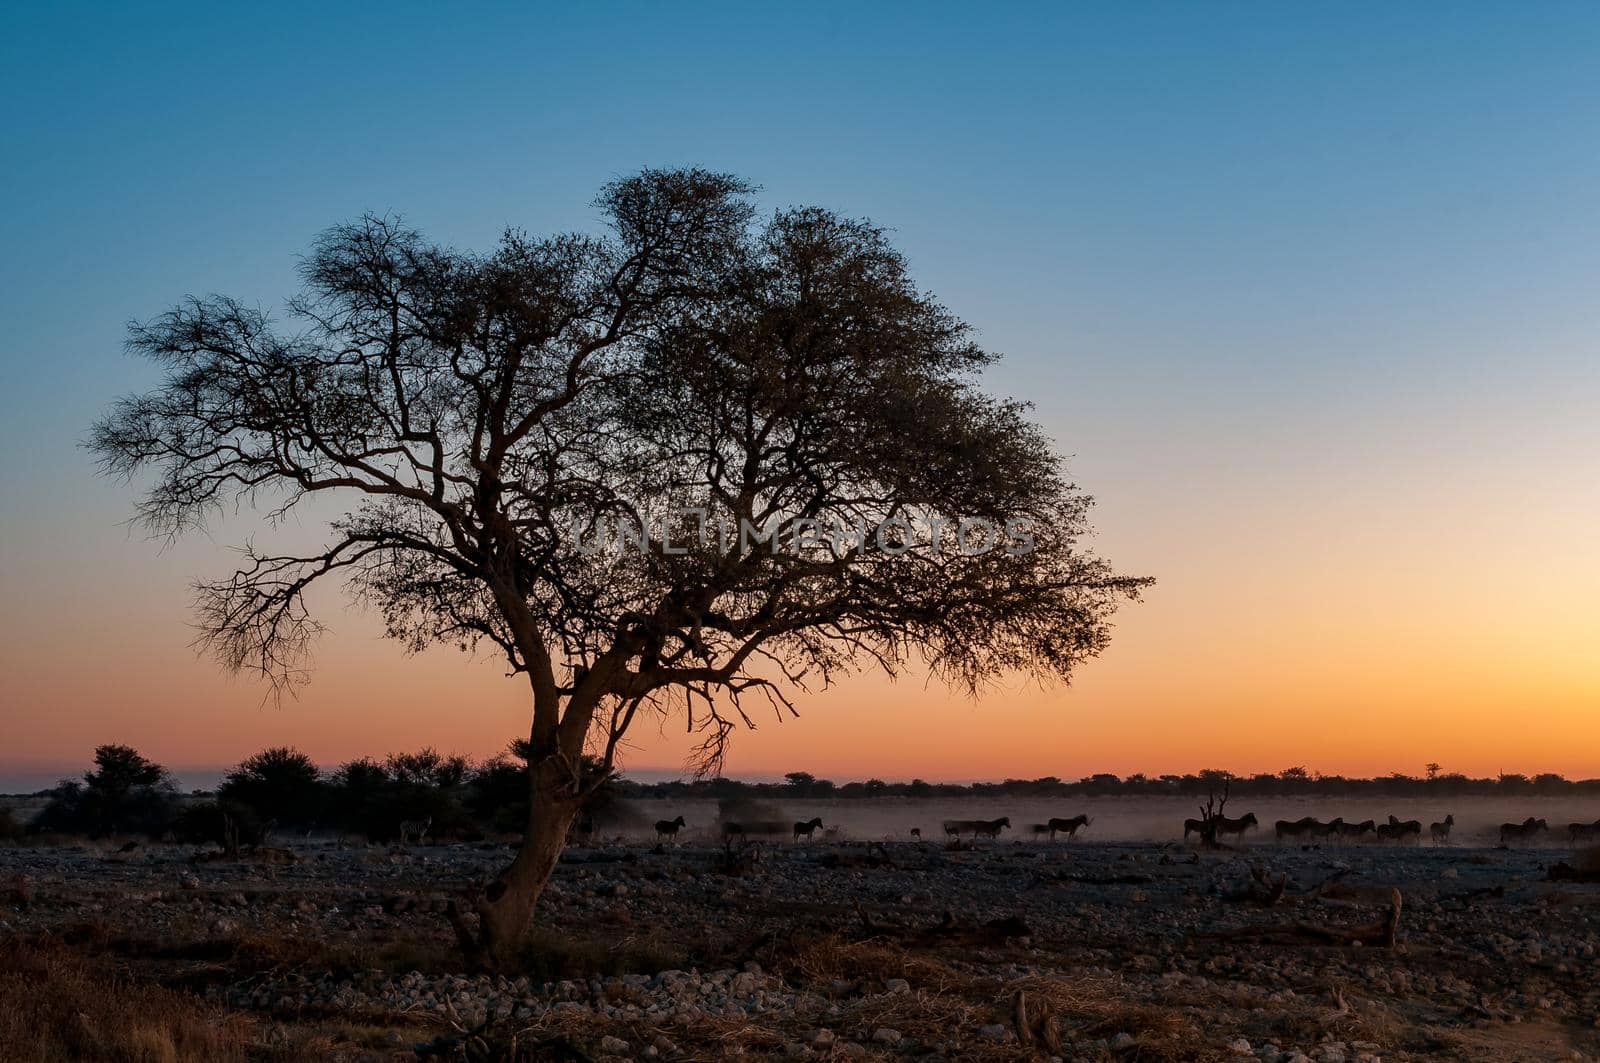 Silhouettes of Burchells walking past a large tree at sunset in northern Namibia